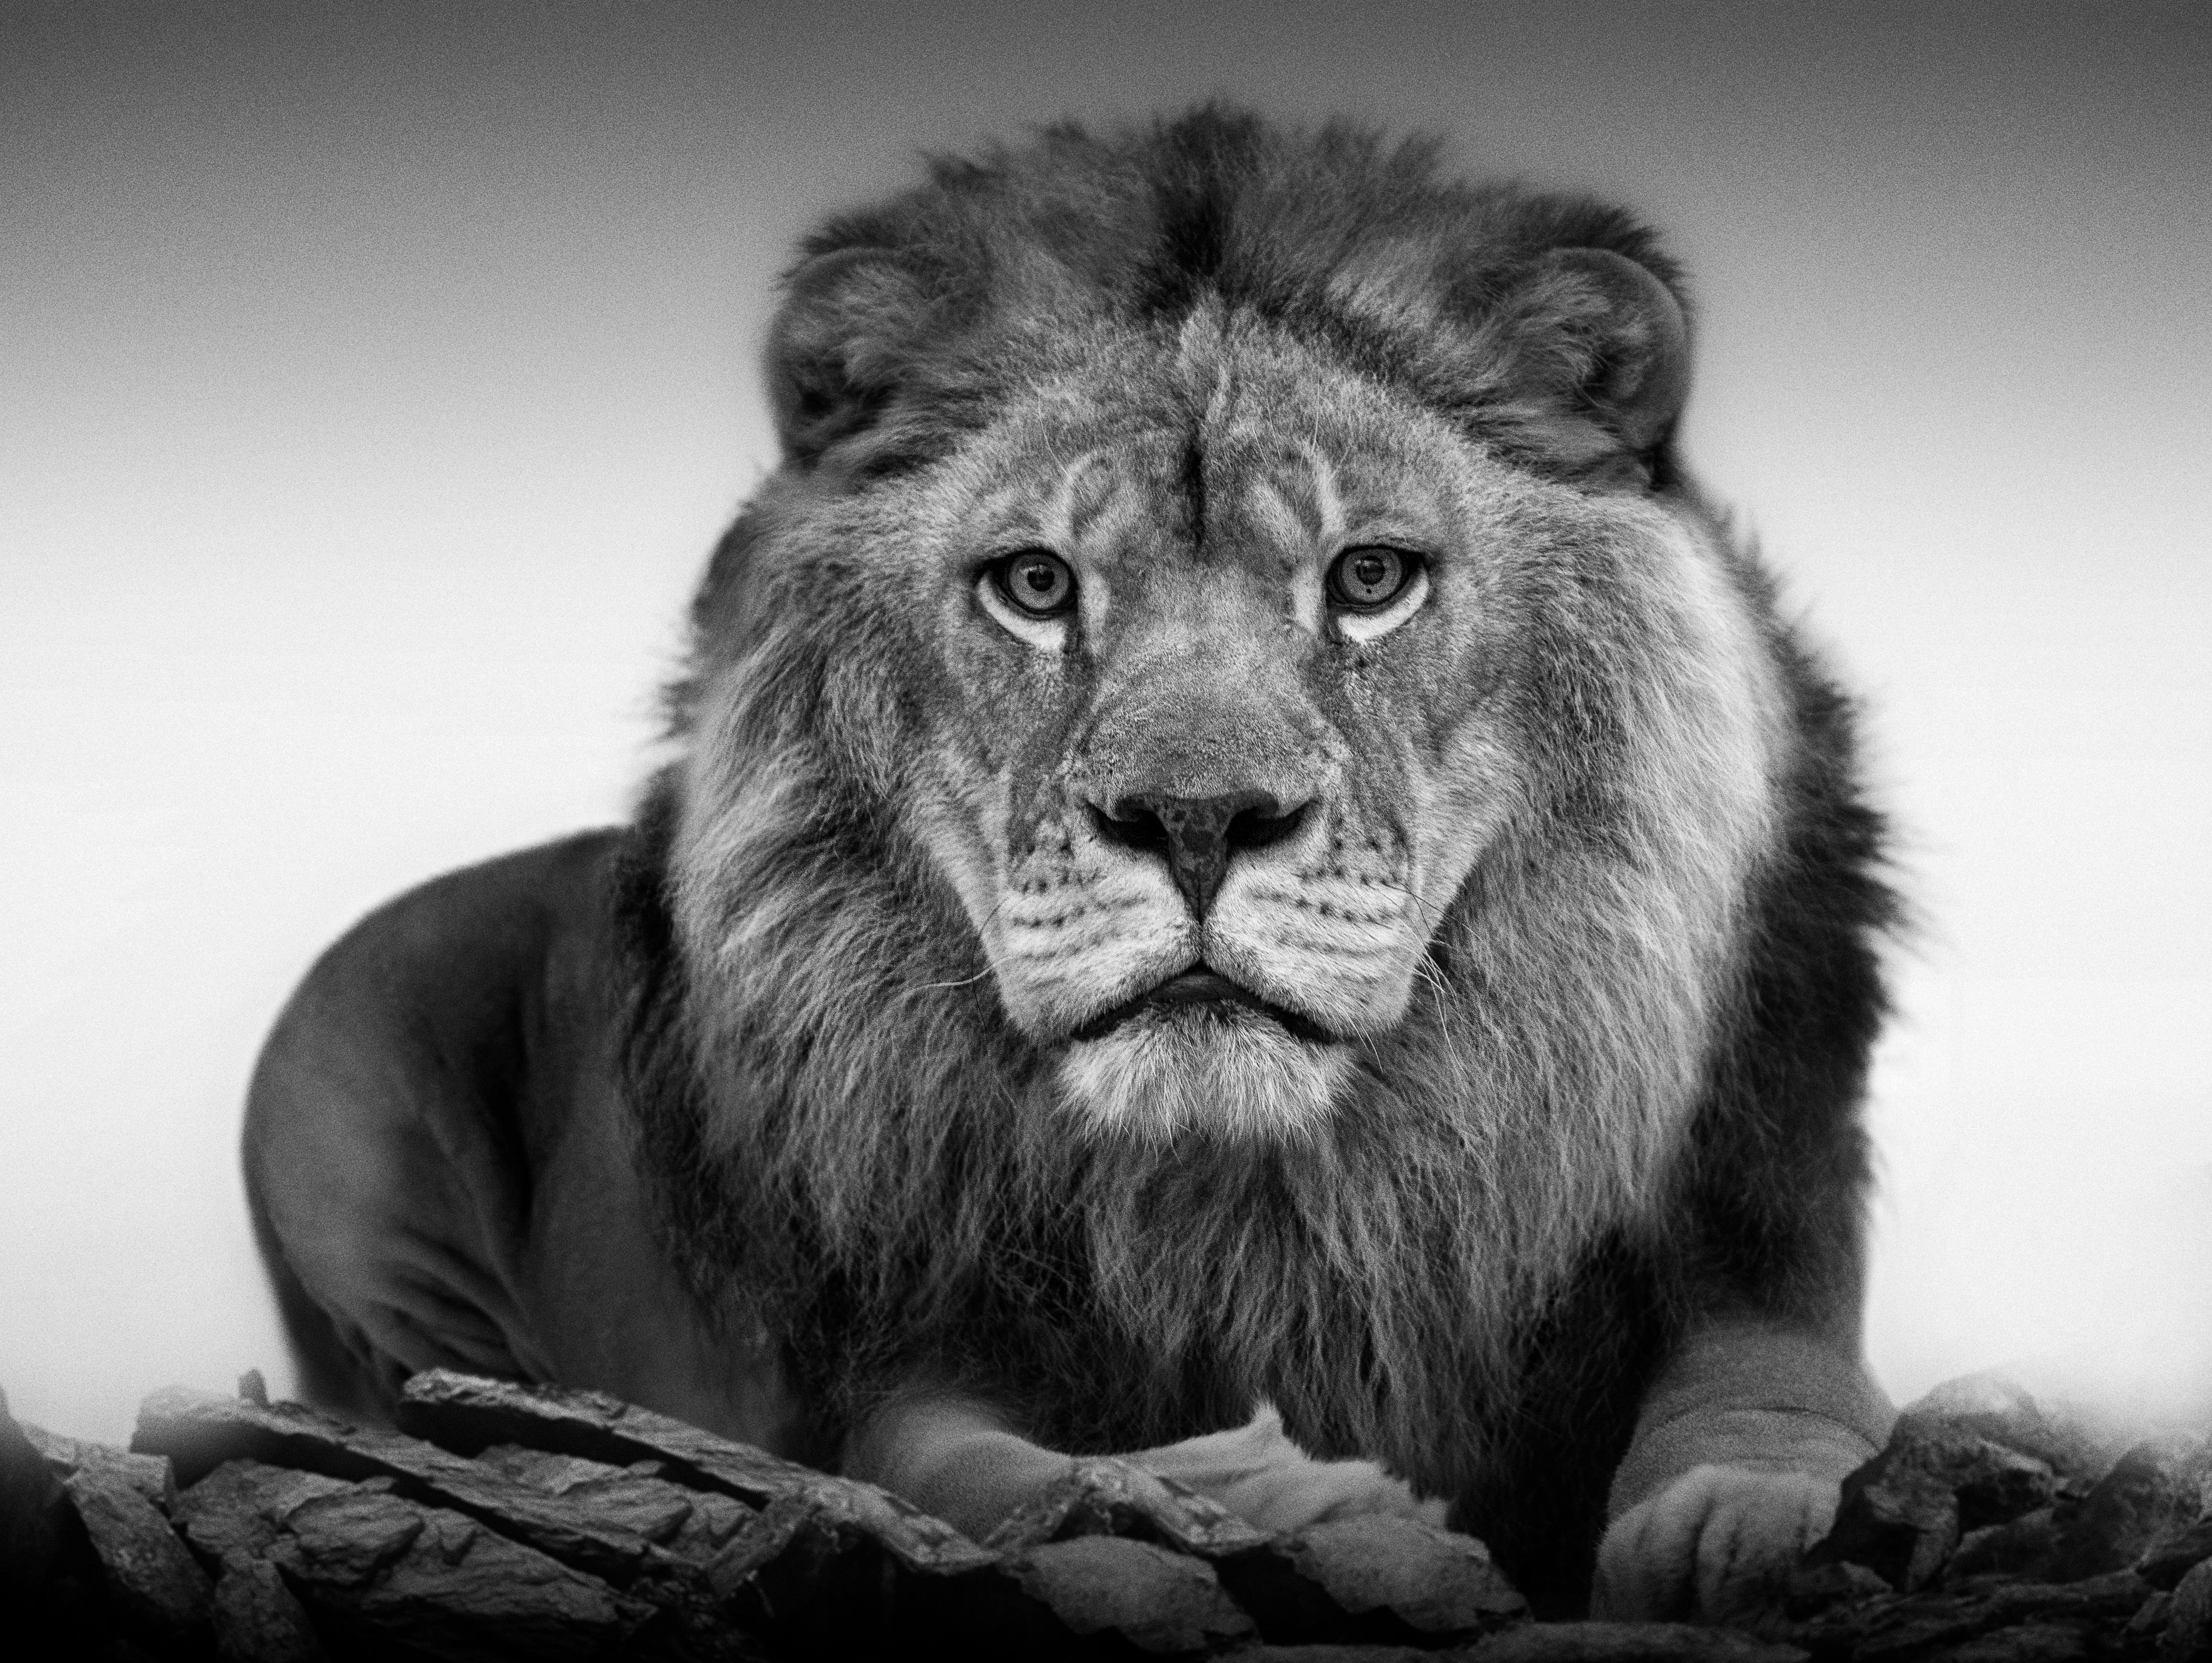 Shane Russeck Black and White Photograph - SPECIAL 1stdibs PRICE: Lion Portrait - 36x48 Black & White Photography